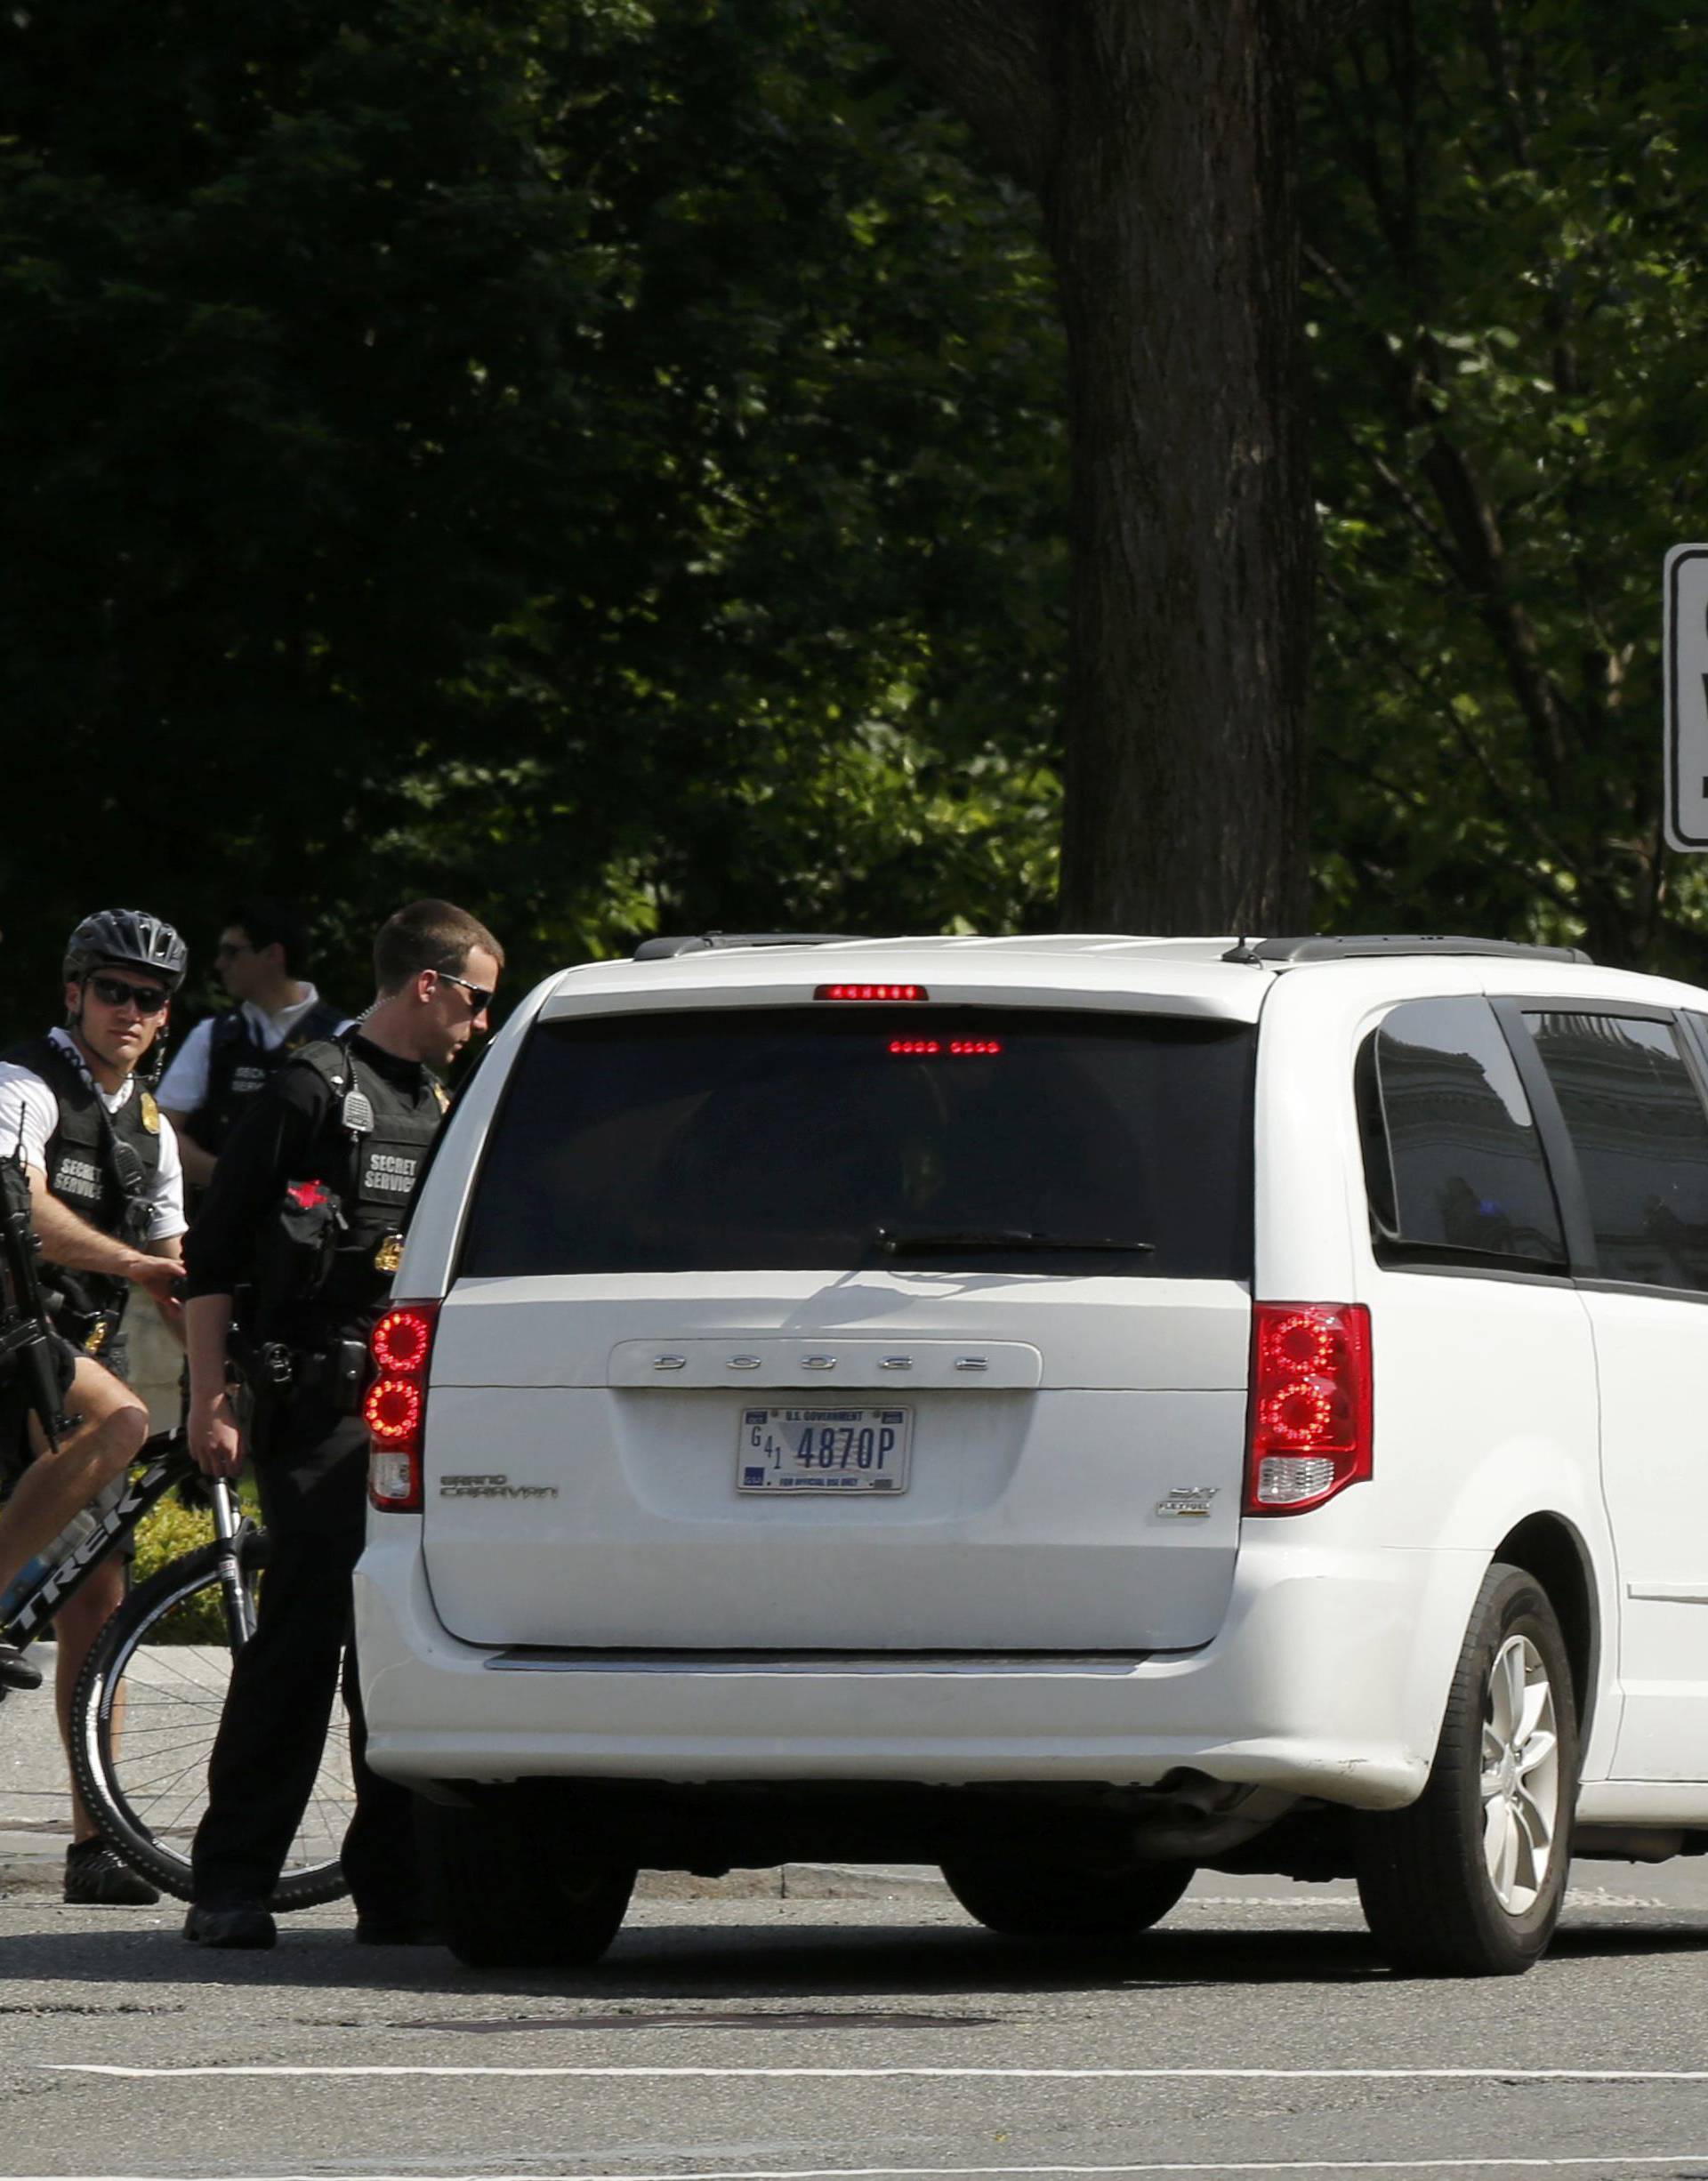 Secret Service agents stand guard after a shooting incident near the White House in Washington DC